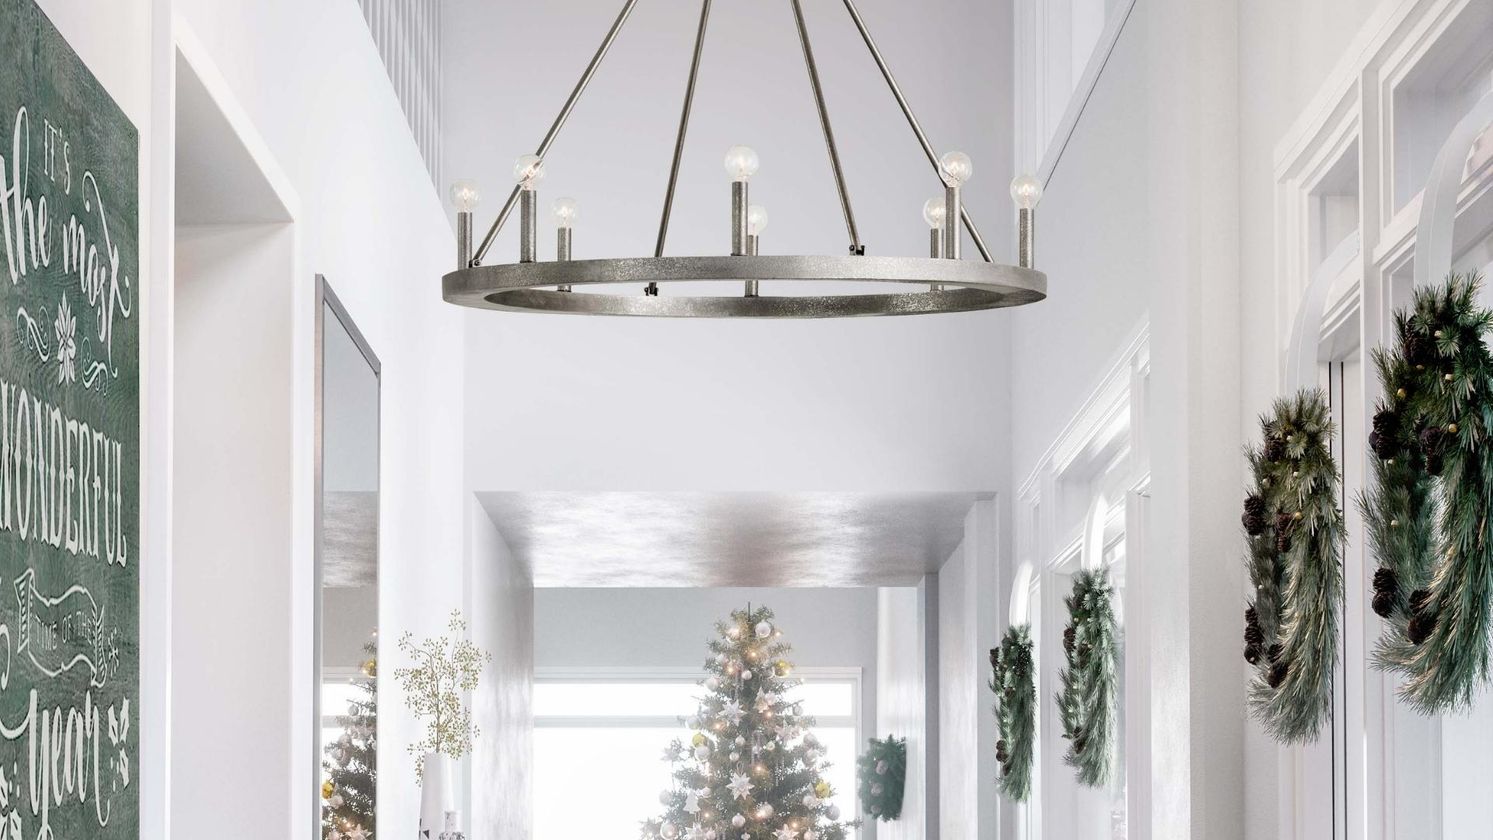 Chandelier hanging in a hallway with holiday decor